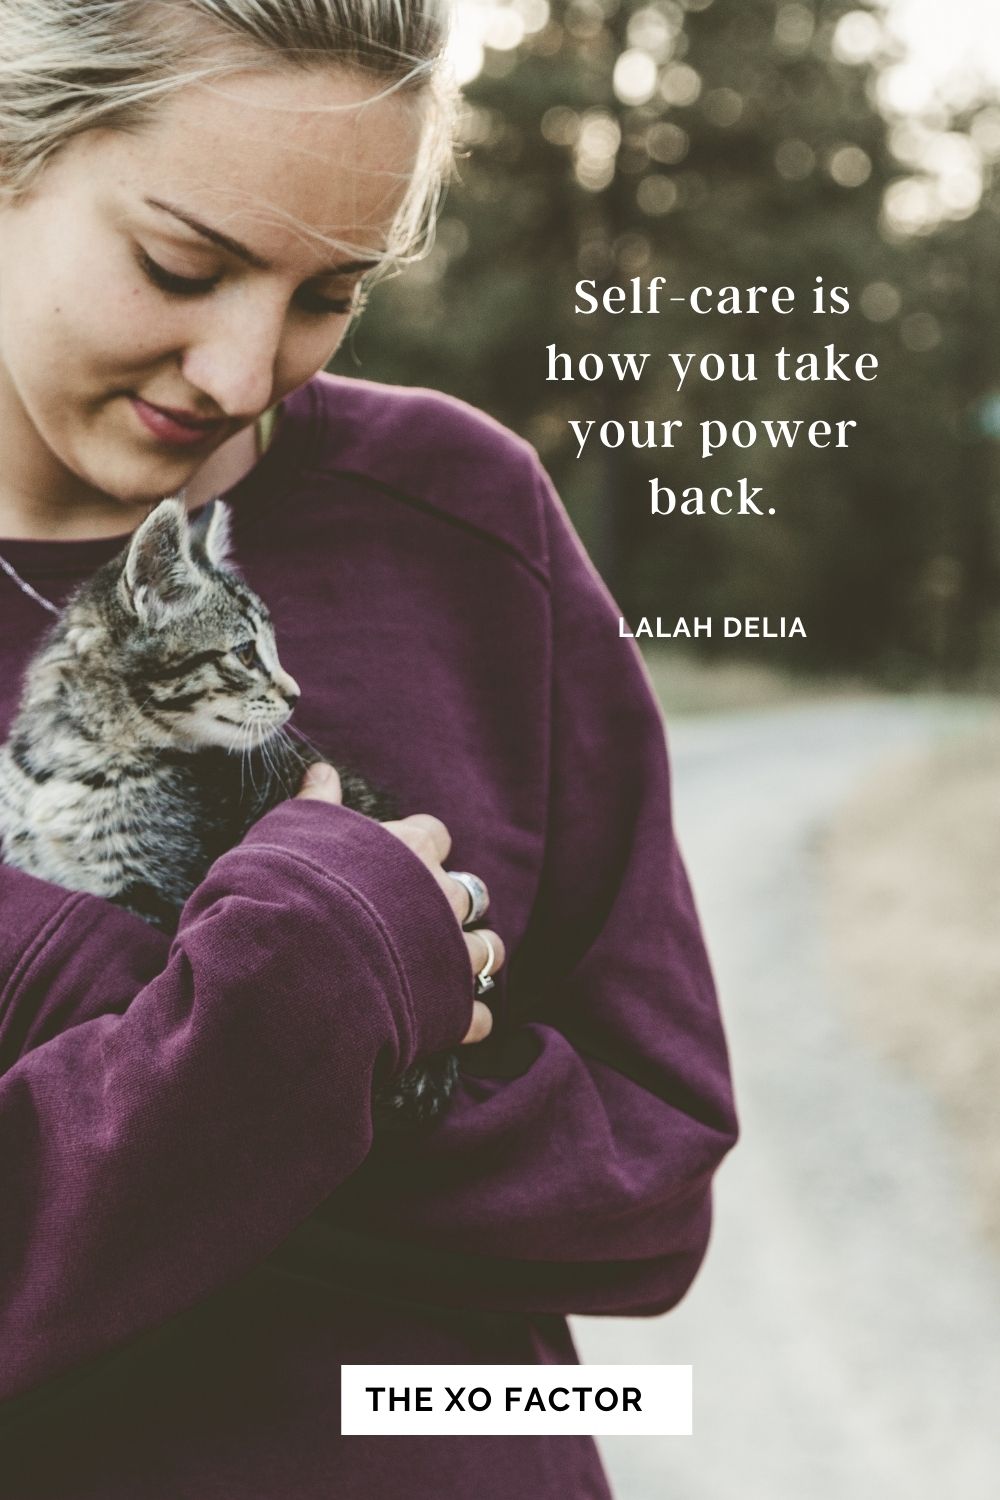 Self-care is how you take your power back. Lalah Delia